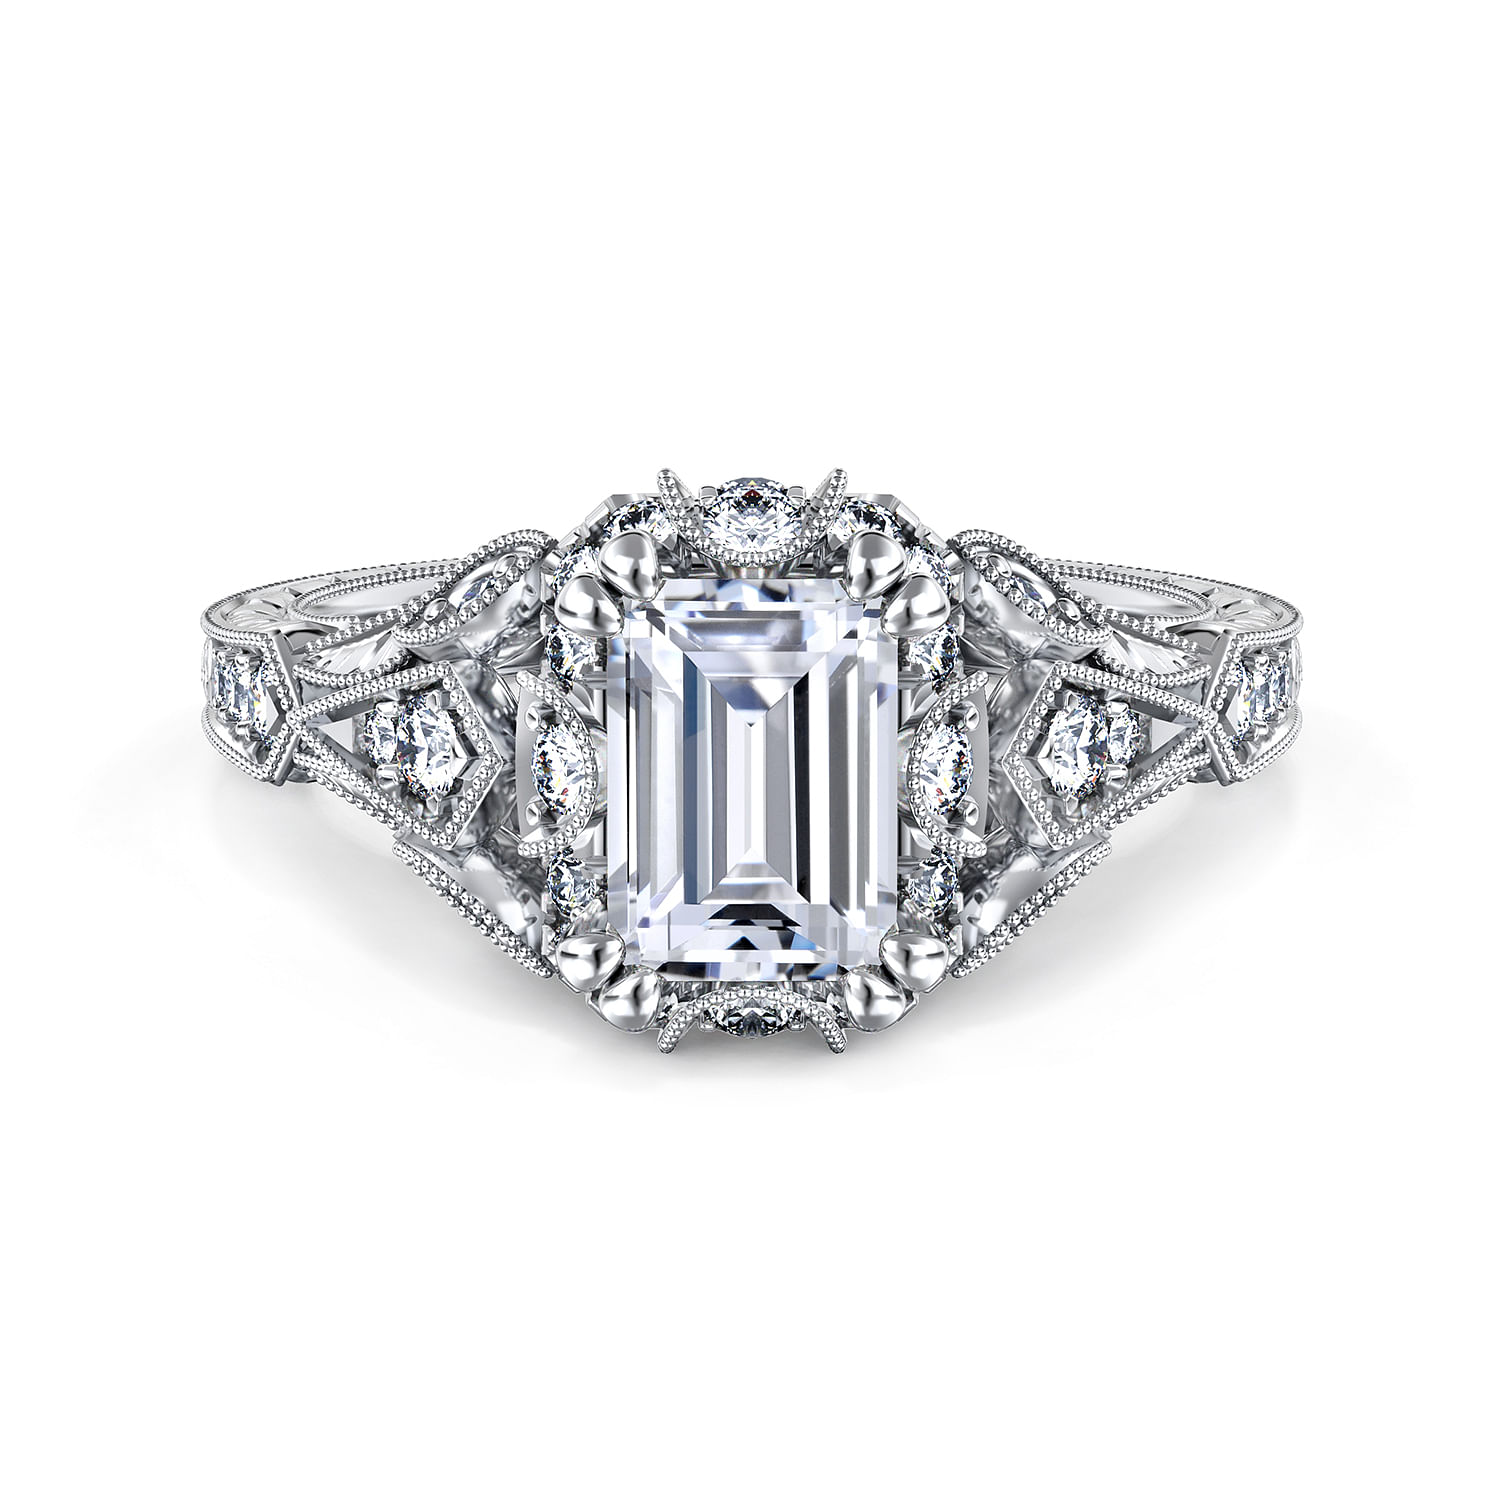 Unique 14K White Gold Vintage Inspired Emerald Cut Diamond Halo Engagement Ring